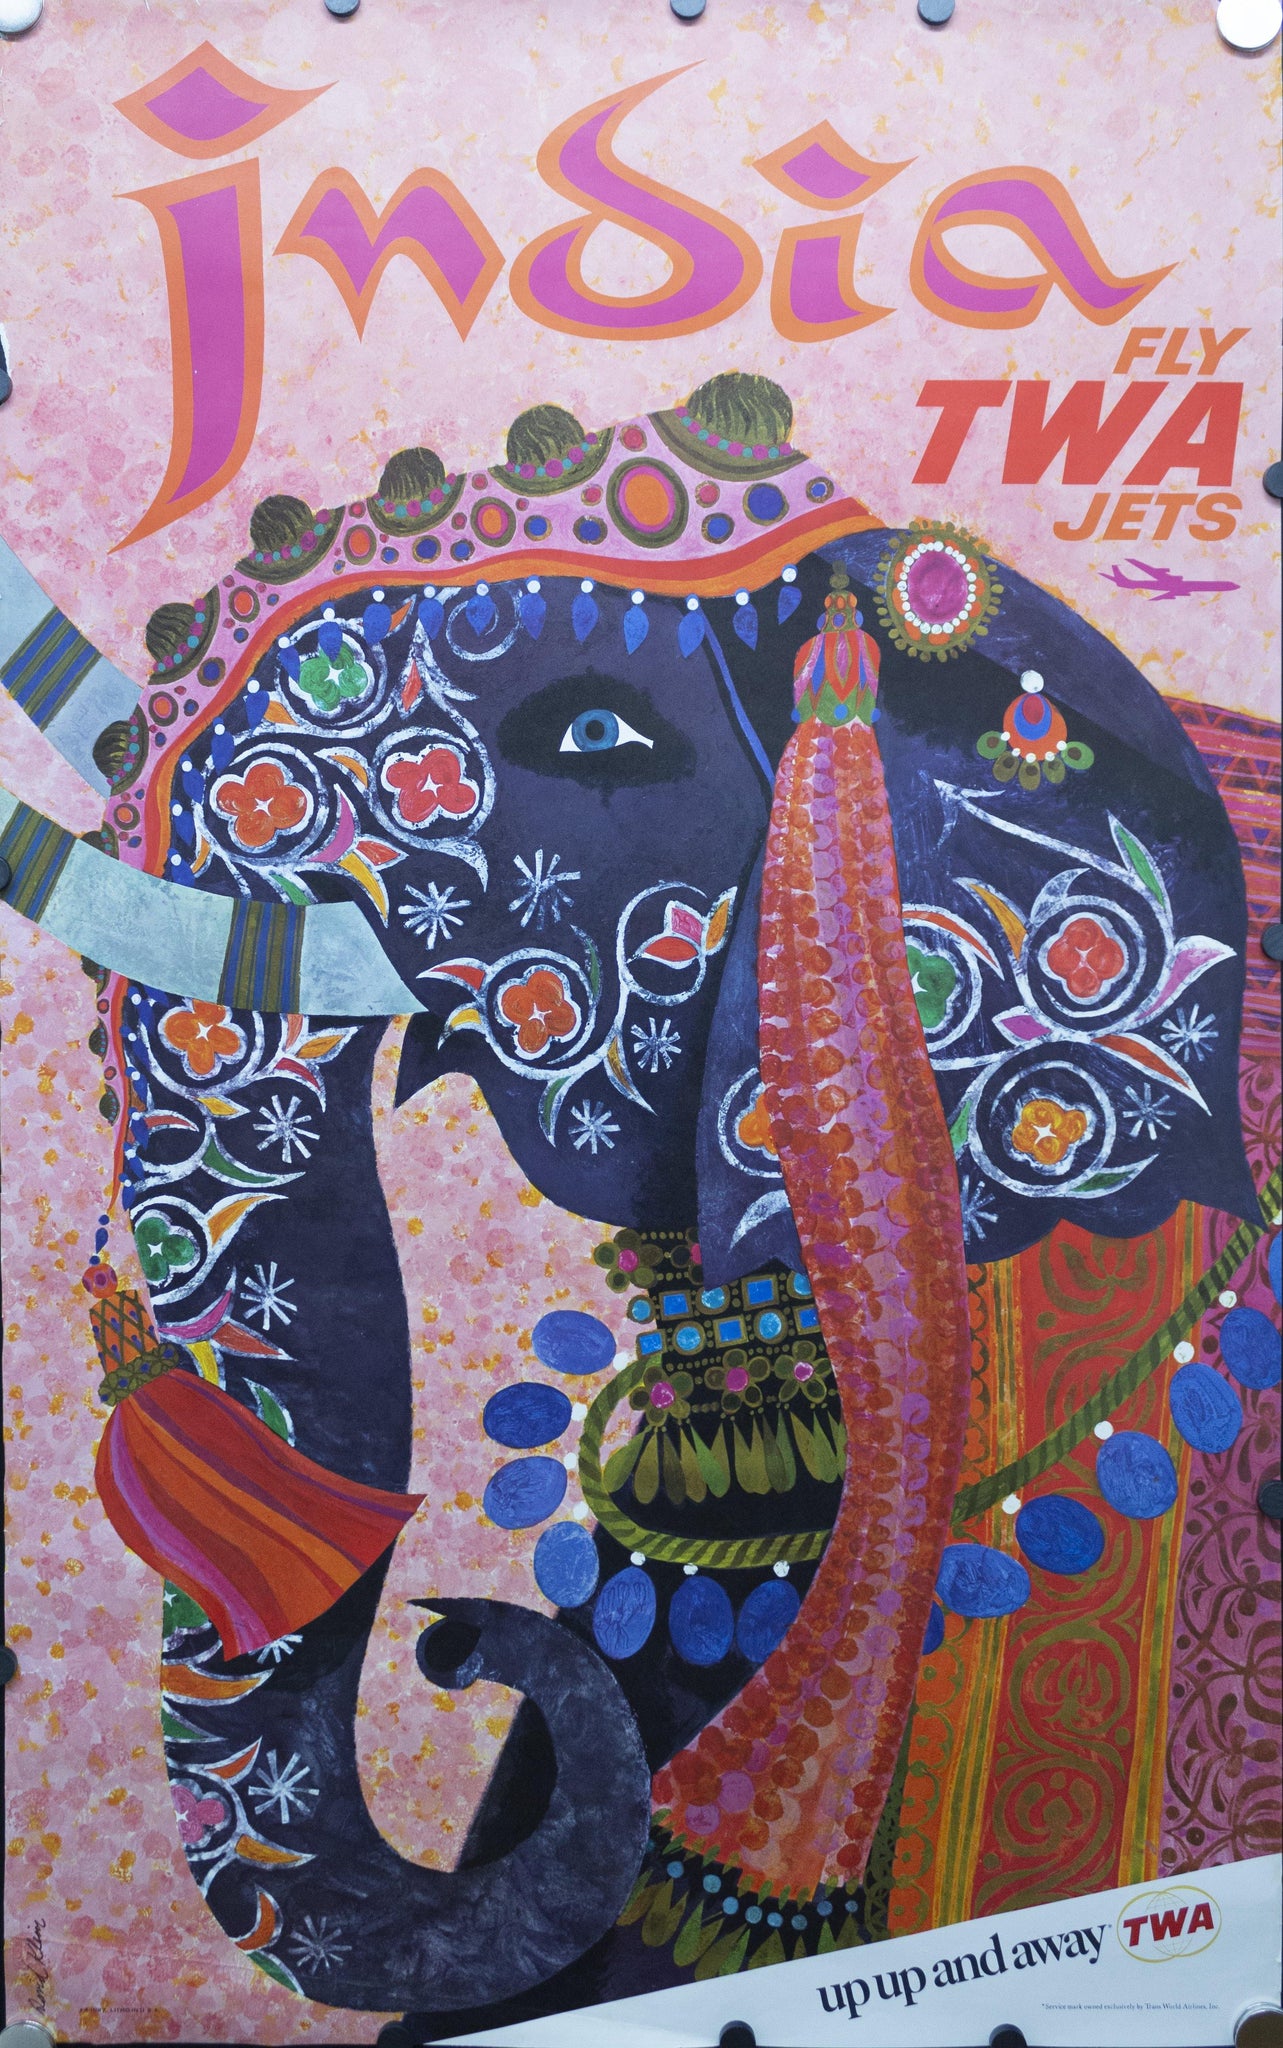 c.1960s India Fly TWA Jets by David Klein - Golden Age Posters